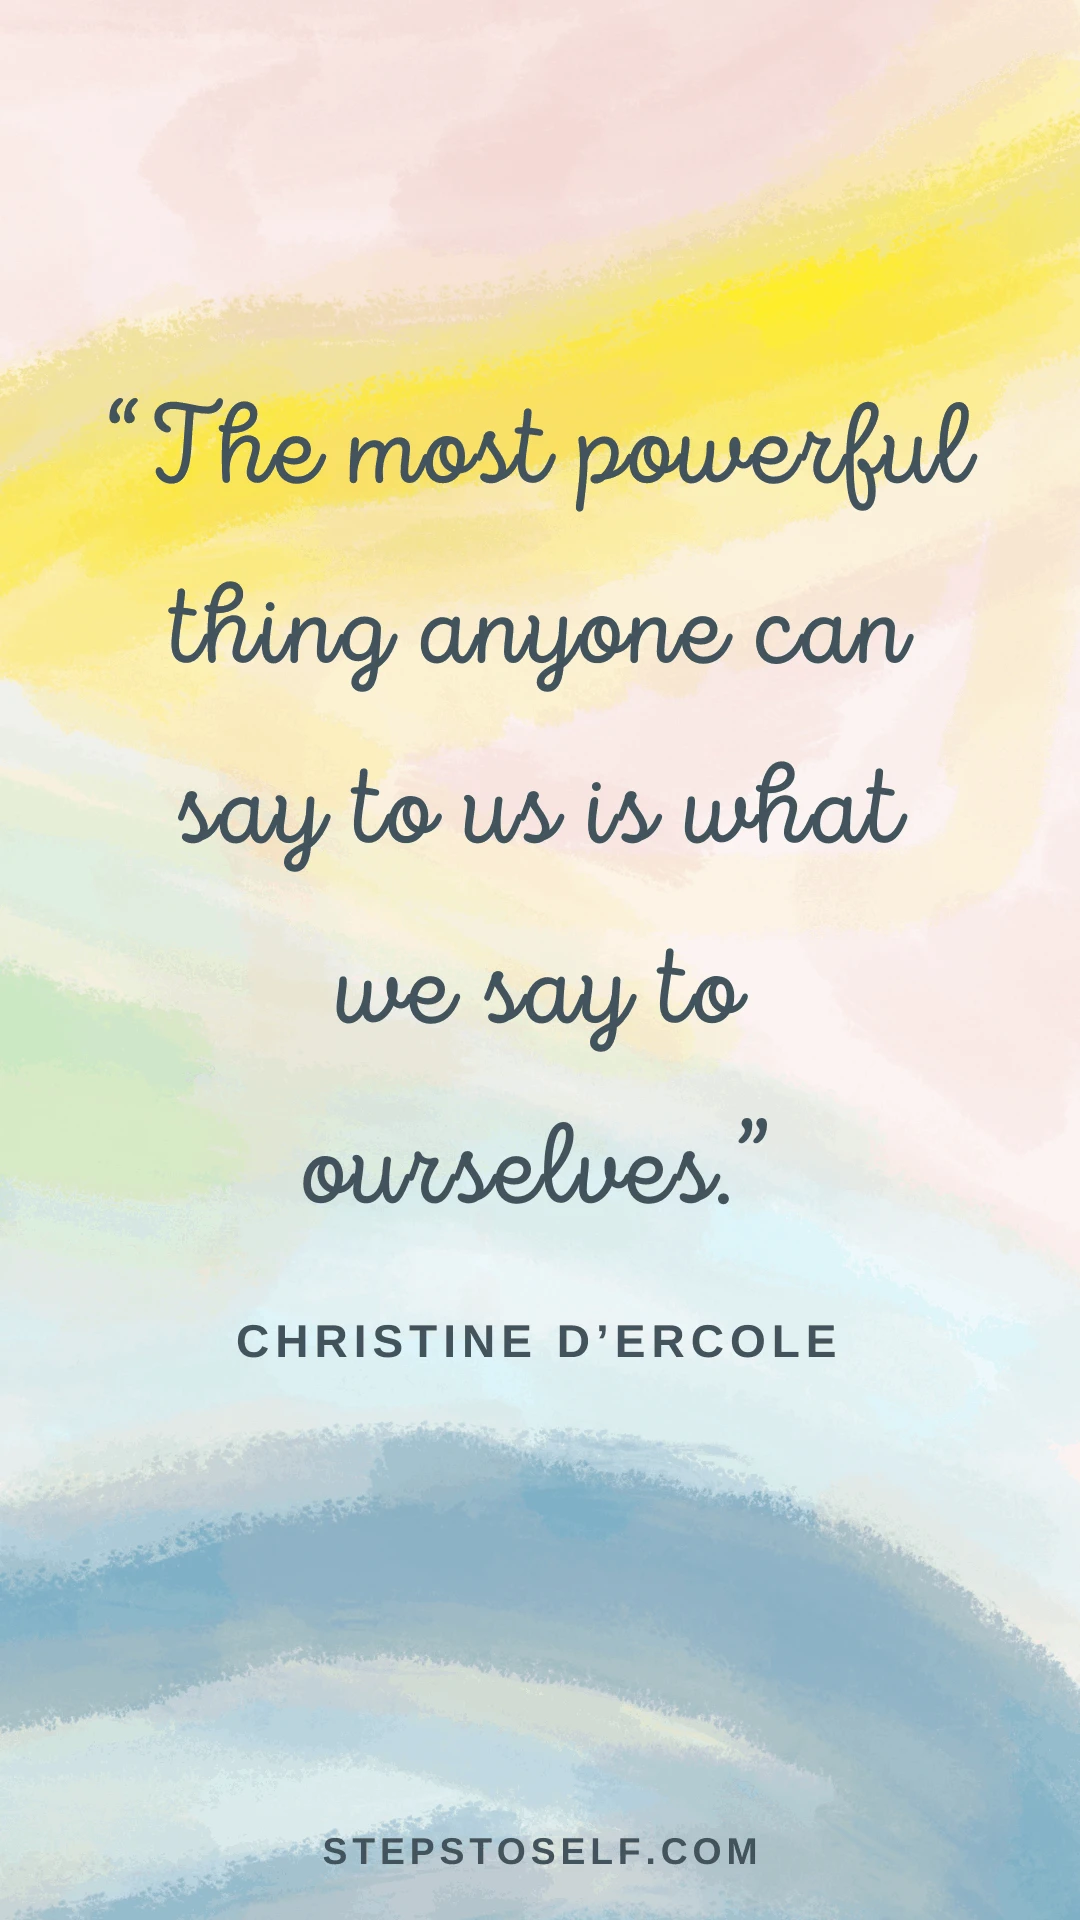 "The most powerful thing anyone can say to us is what we say to ourselves." -Christine D'Ercole